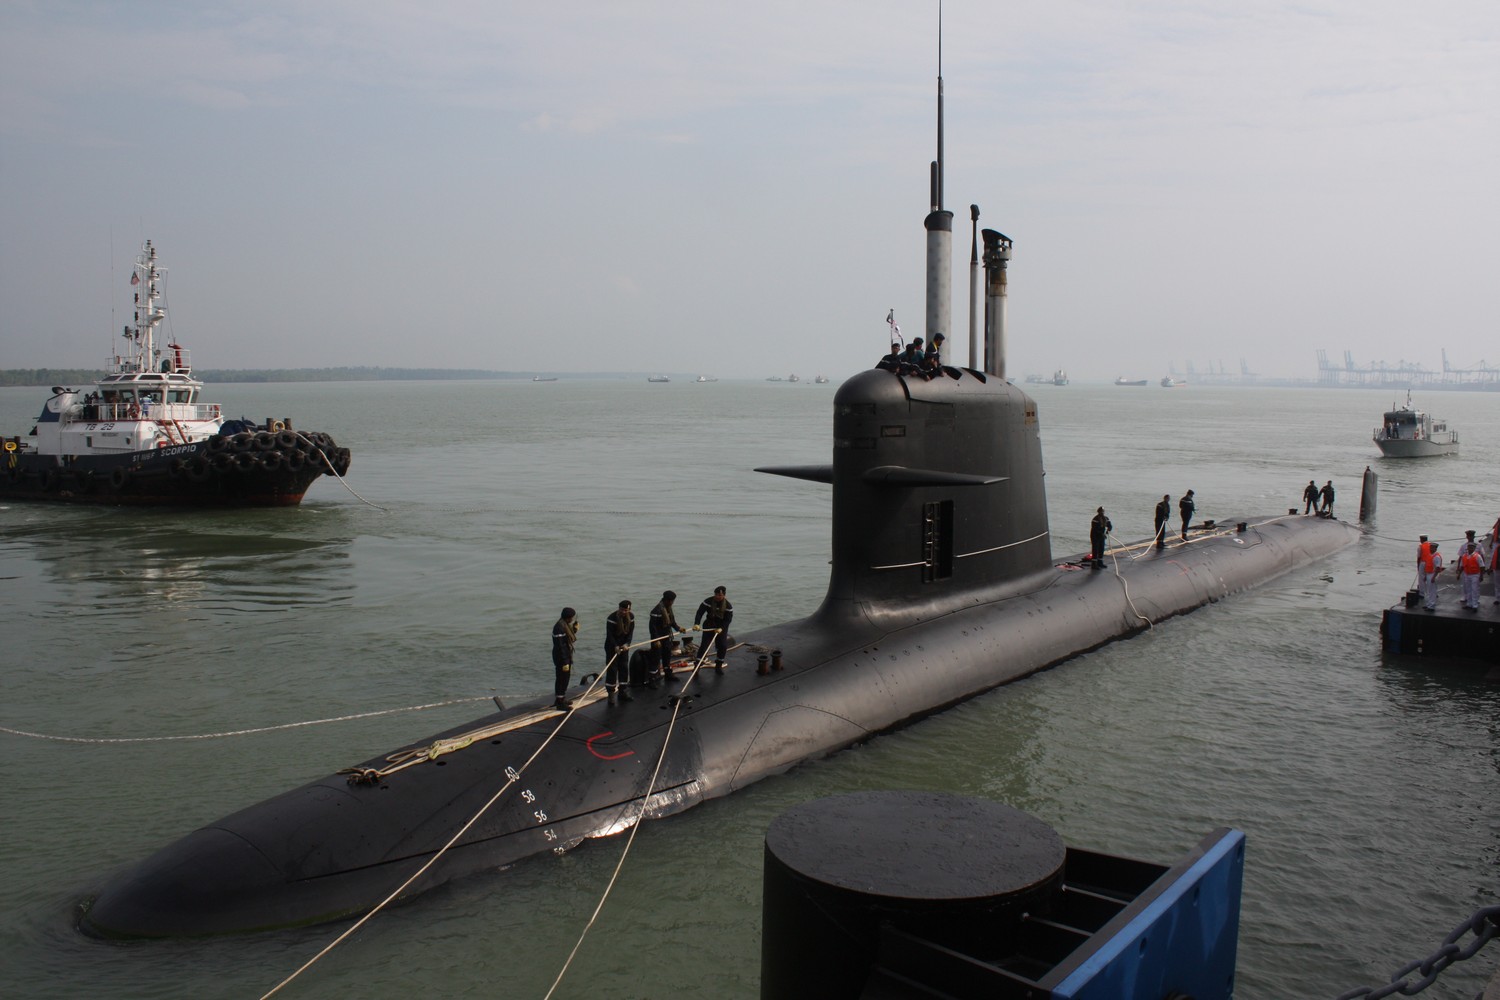 Malaysia's first Scorpene-class diesel-electric submarine docked at its Naval base in Port Klang on the outskirts of Kuala Lumpur on September 3, 2009.